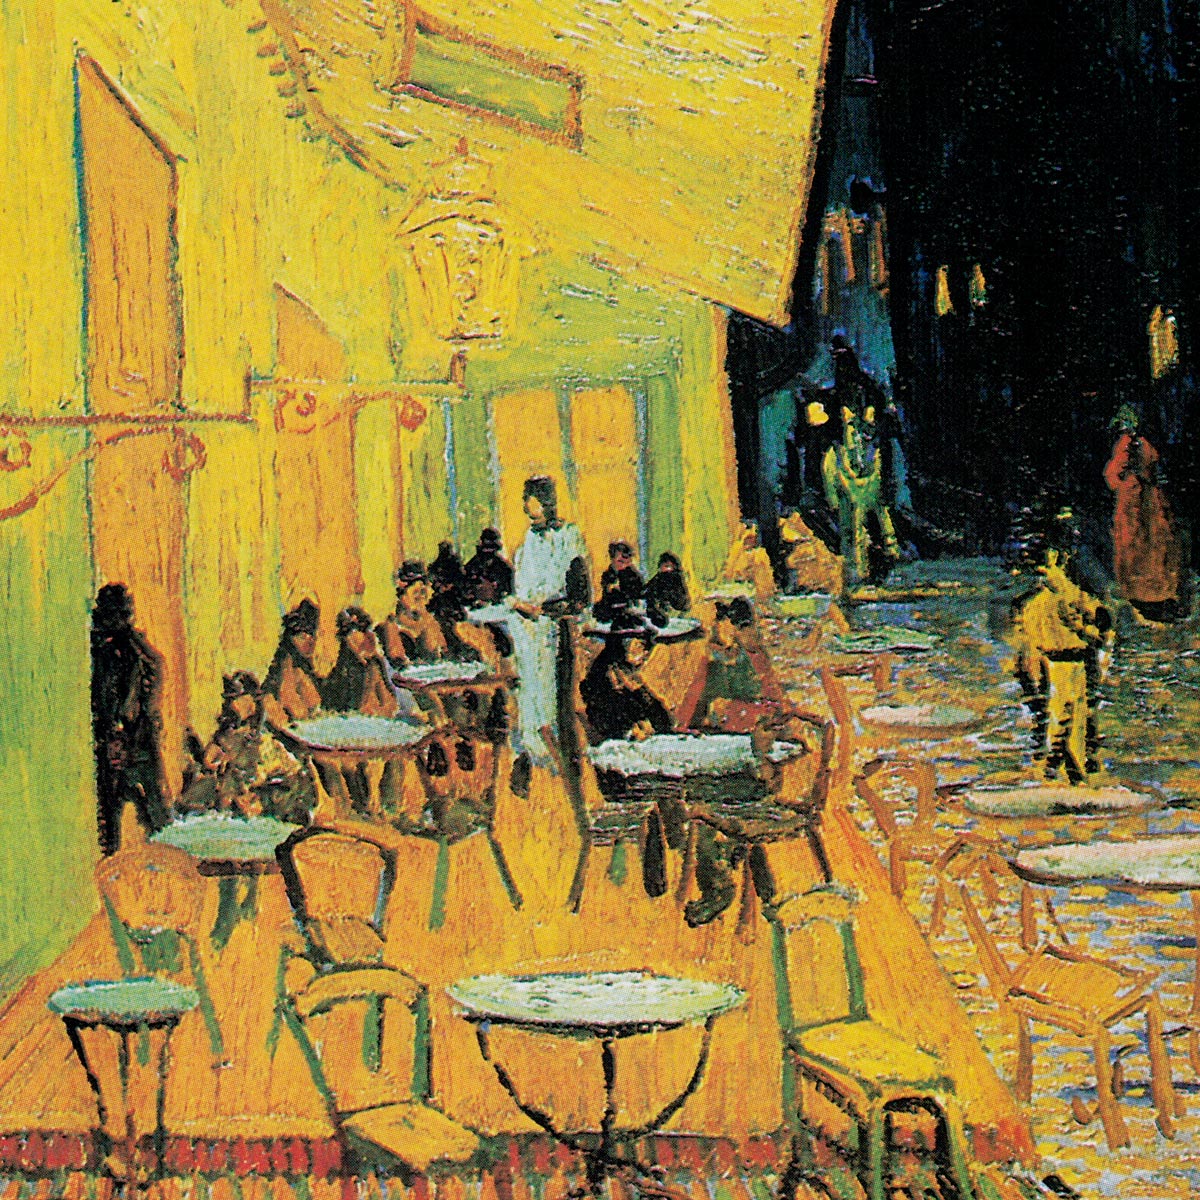 Café Terrace at Night Art Exhibition Poster by Van Gogh